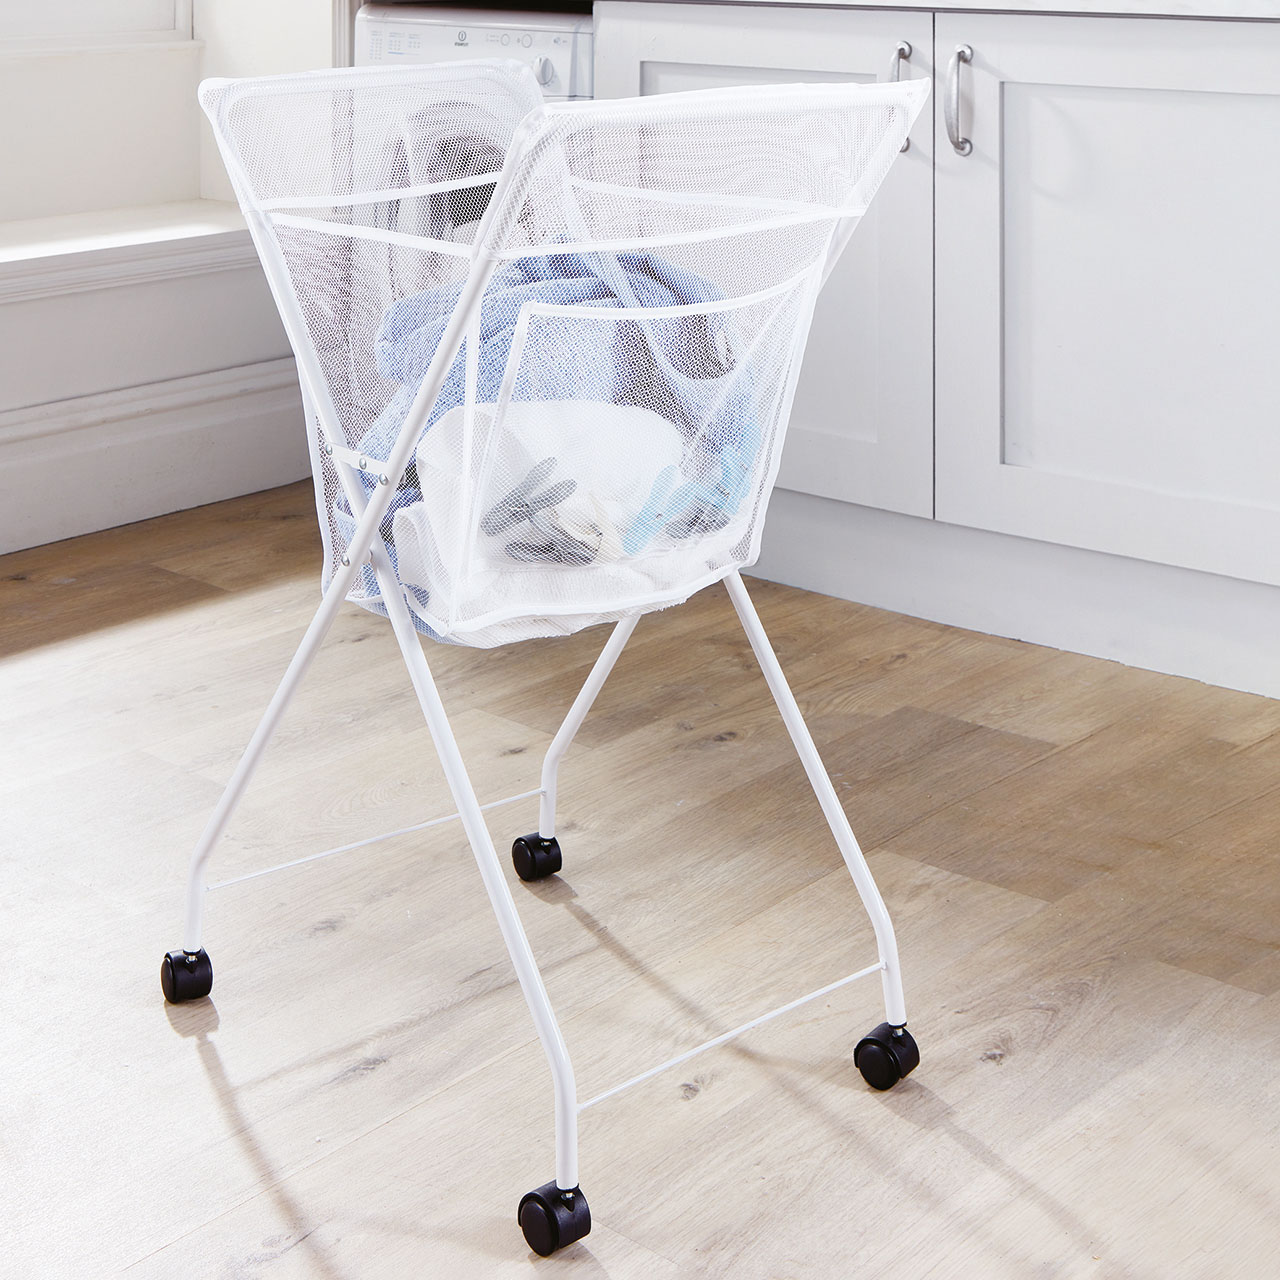 No Bend Laundry Trolley on Wheels